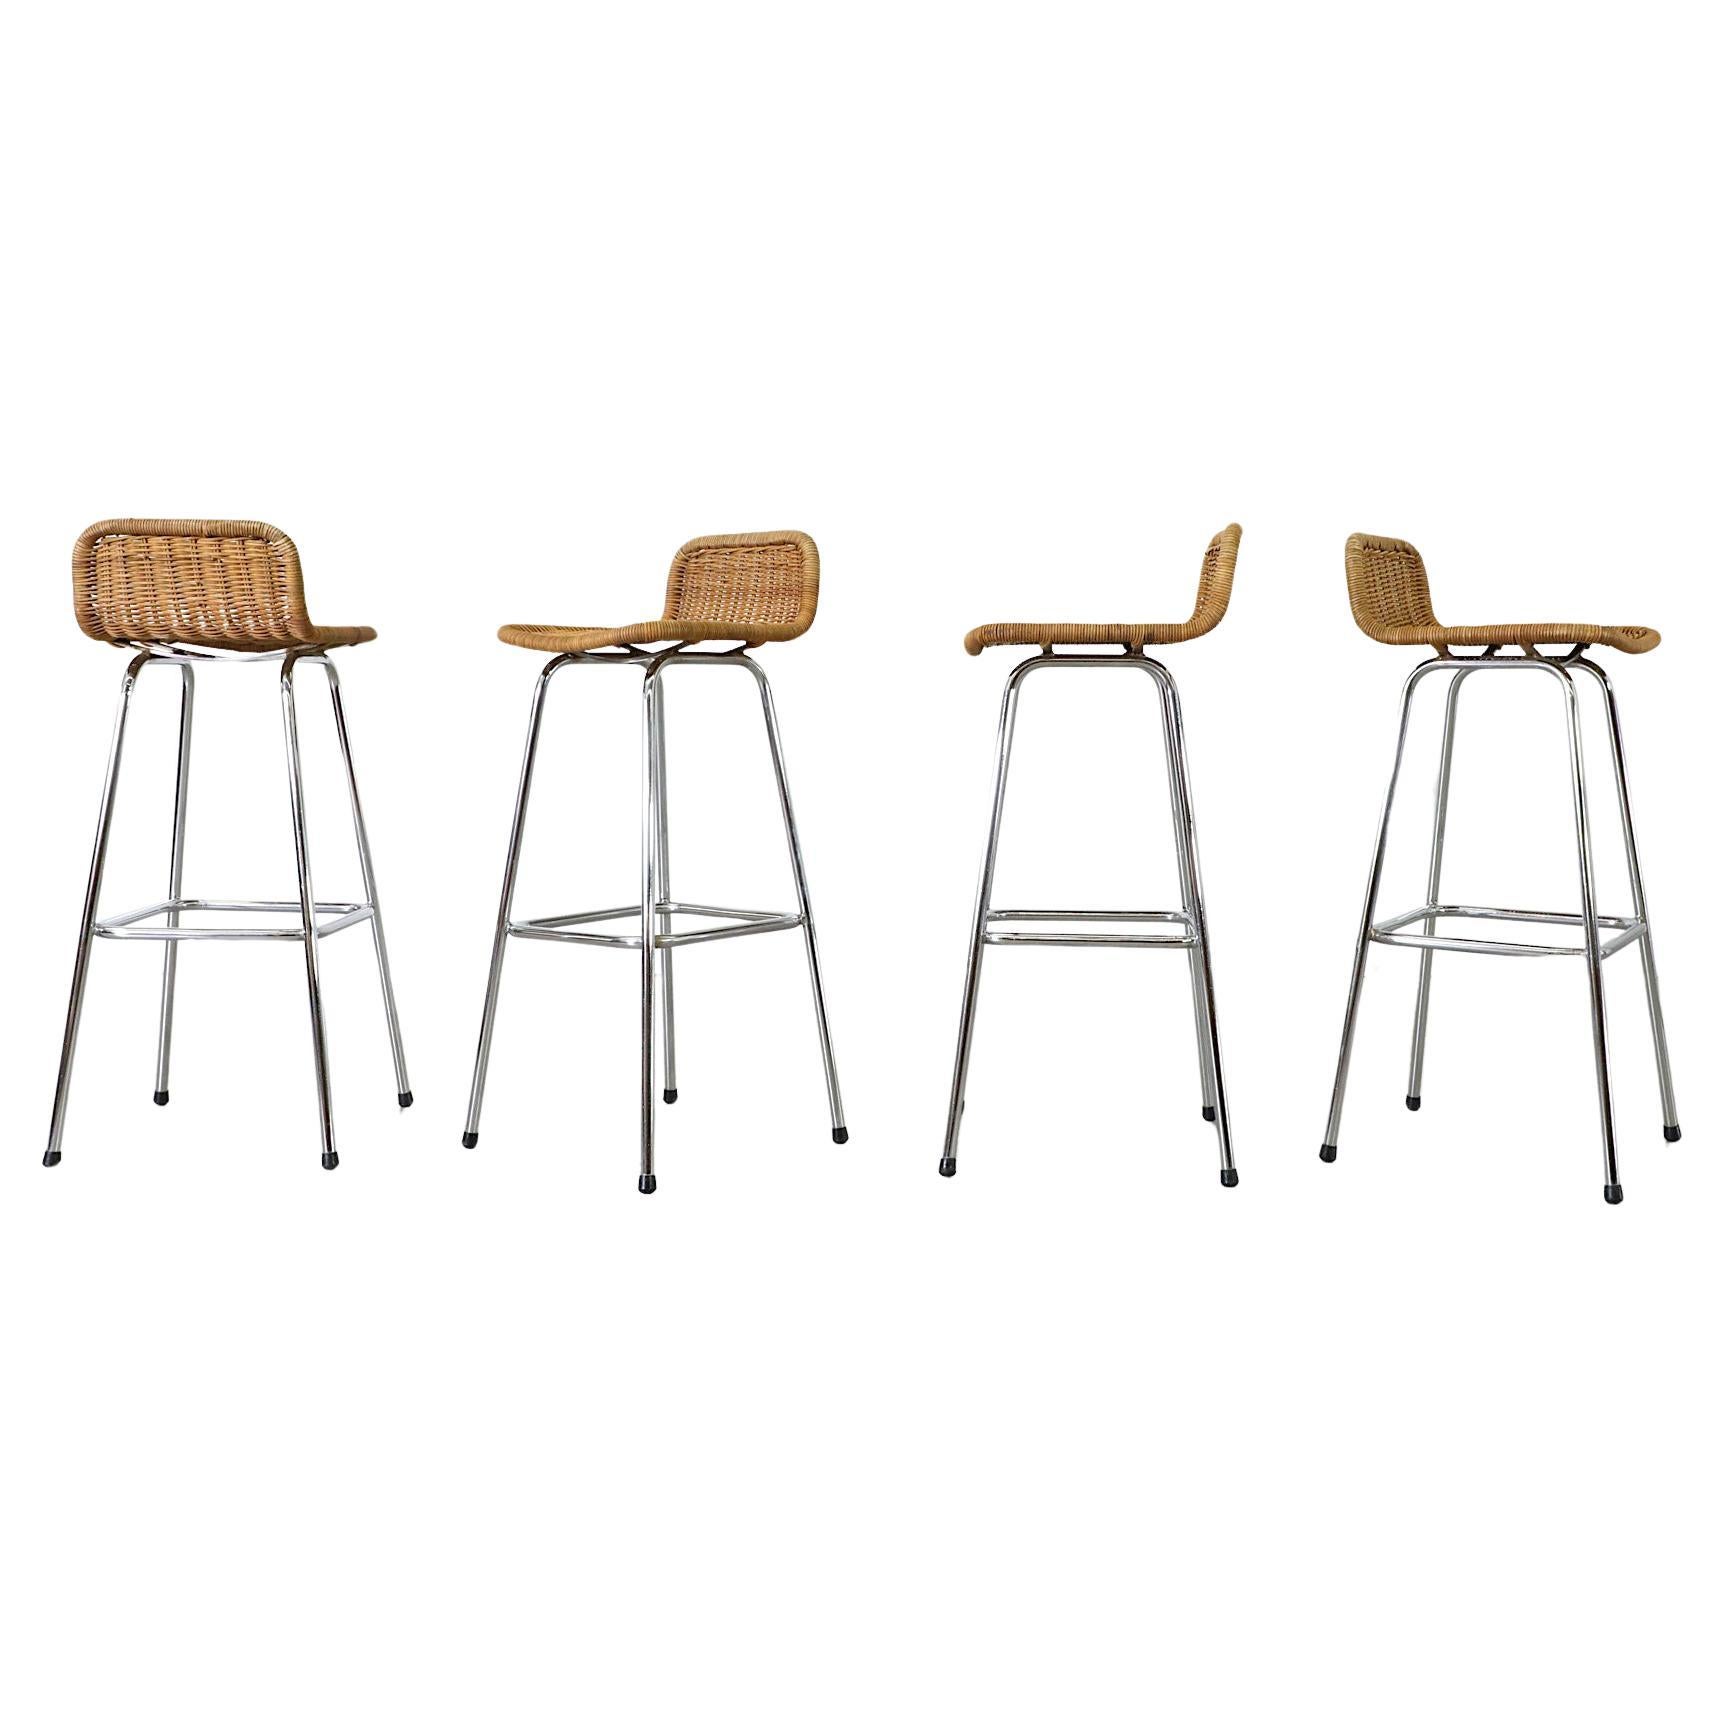 Set of 4 Charlotte Perriand Style Wicker Bar Stools with Chrome Legs For Sale